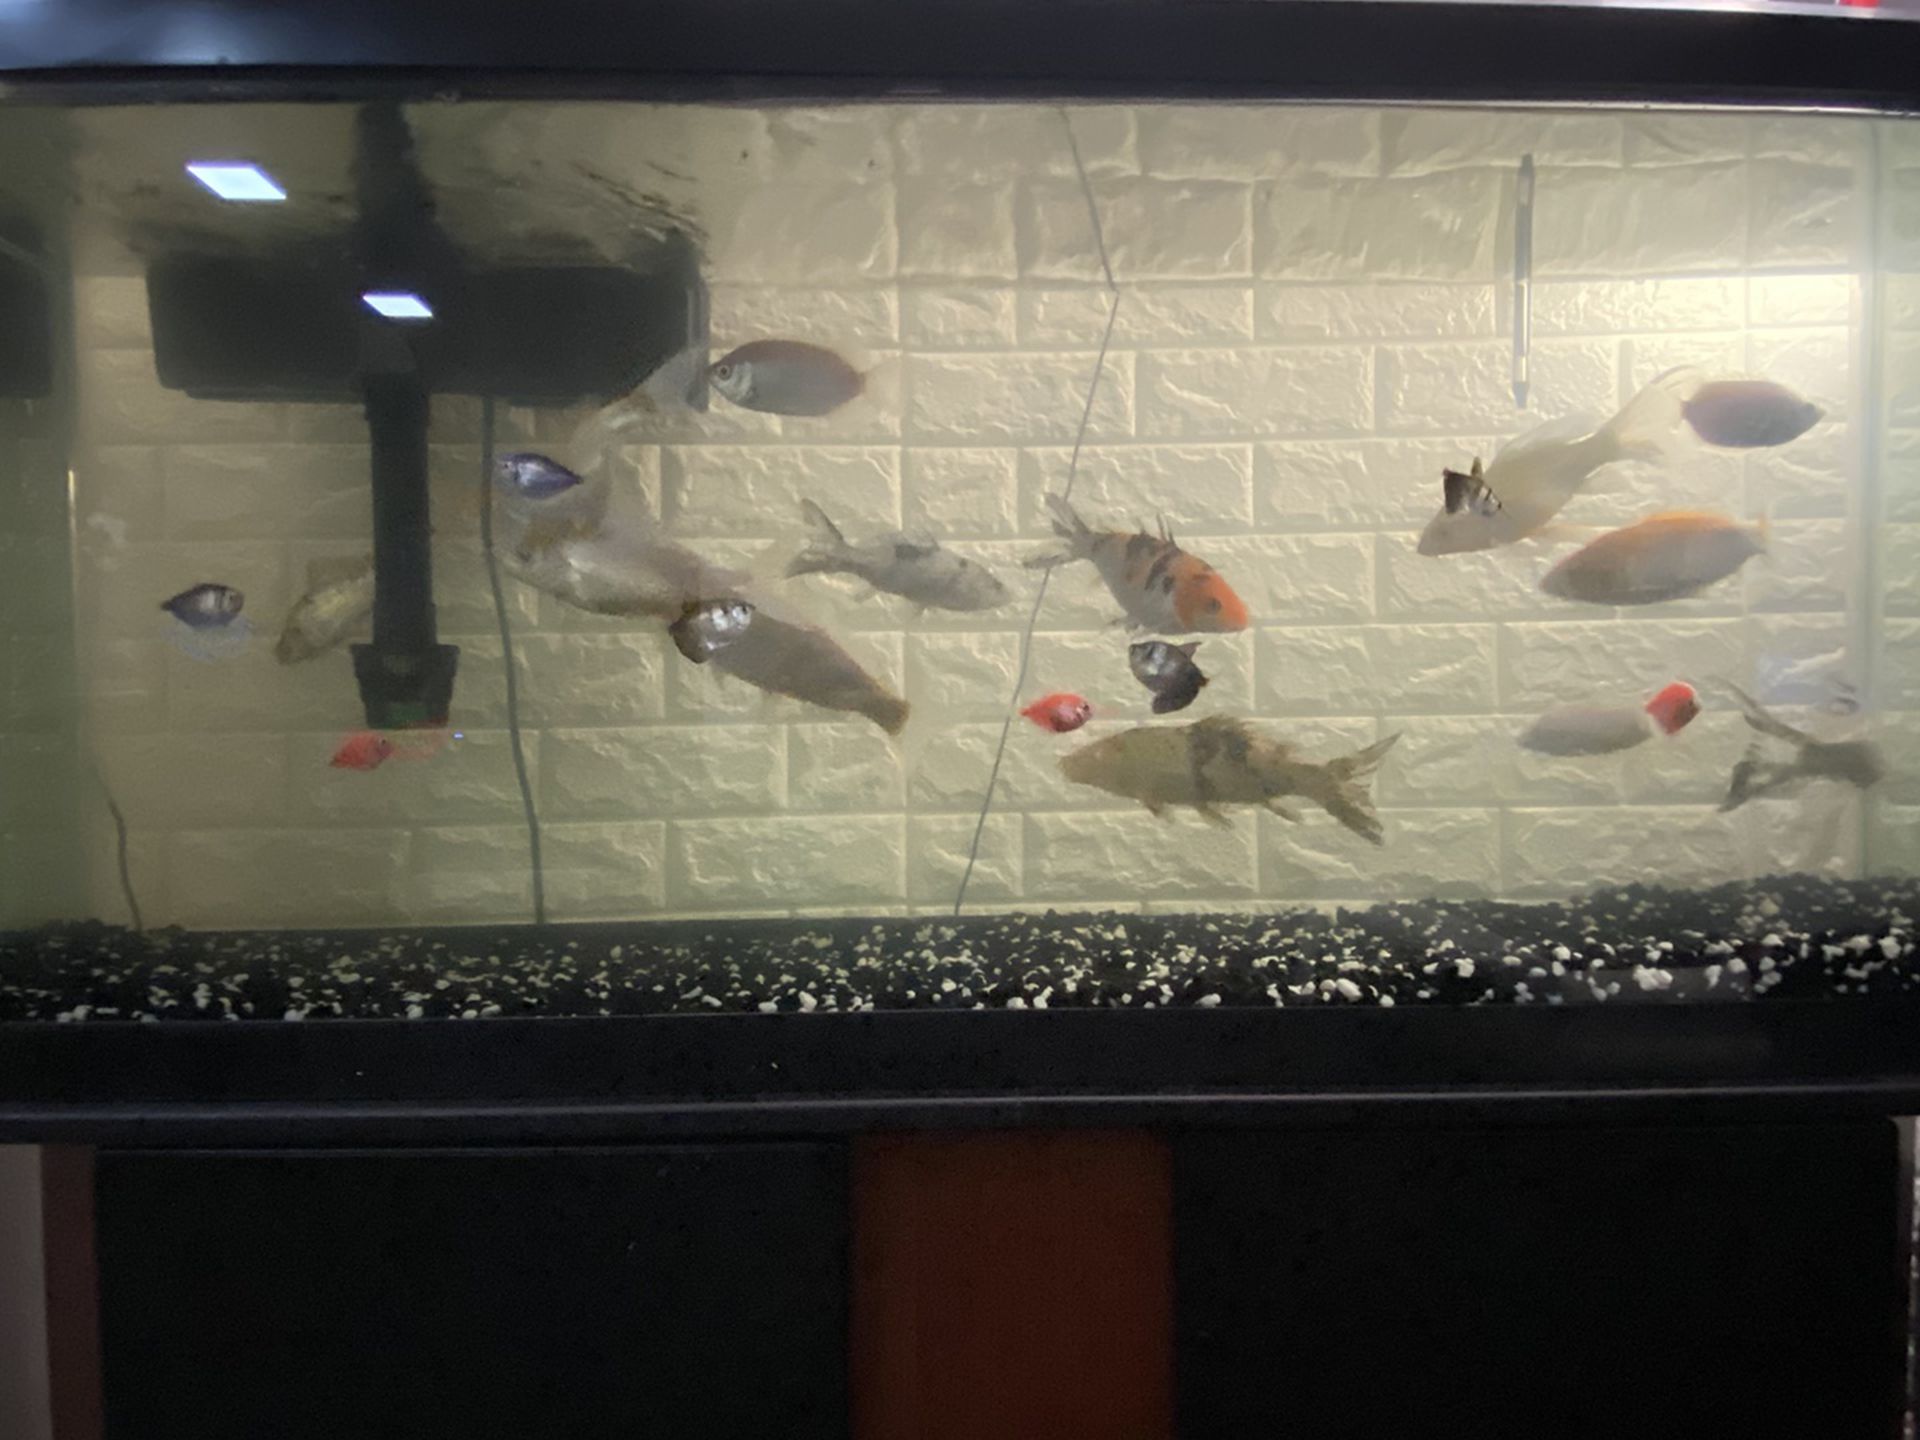 55 Galon Aquarium With 11 Koi Fish (3”-6”), Stand And Filter